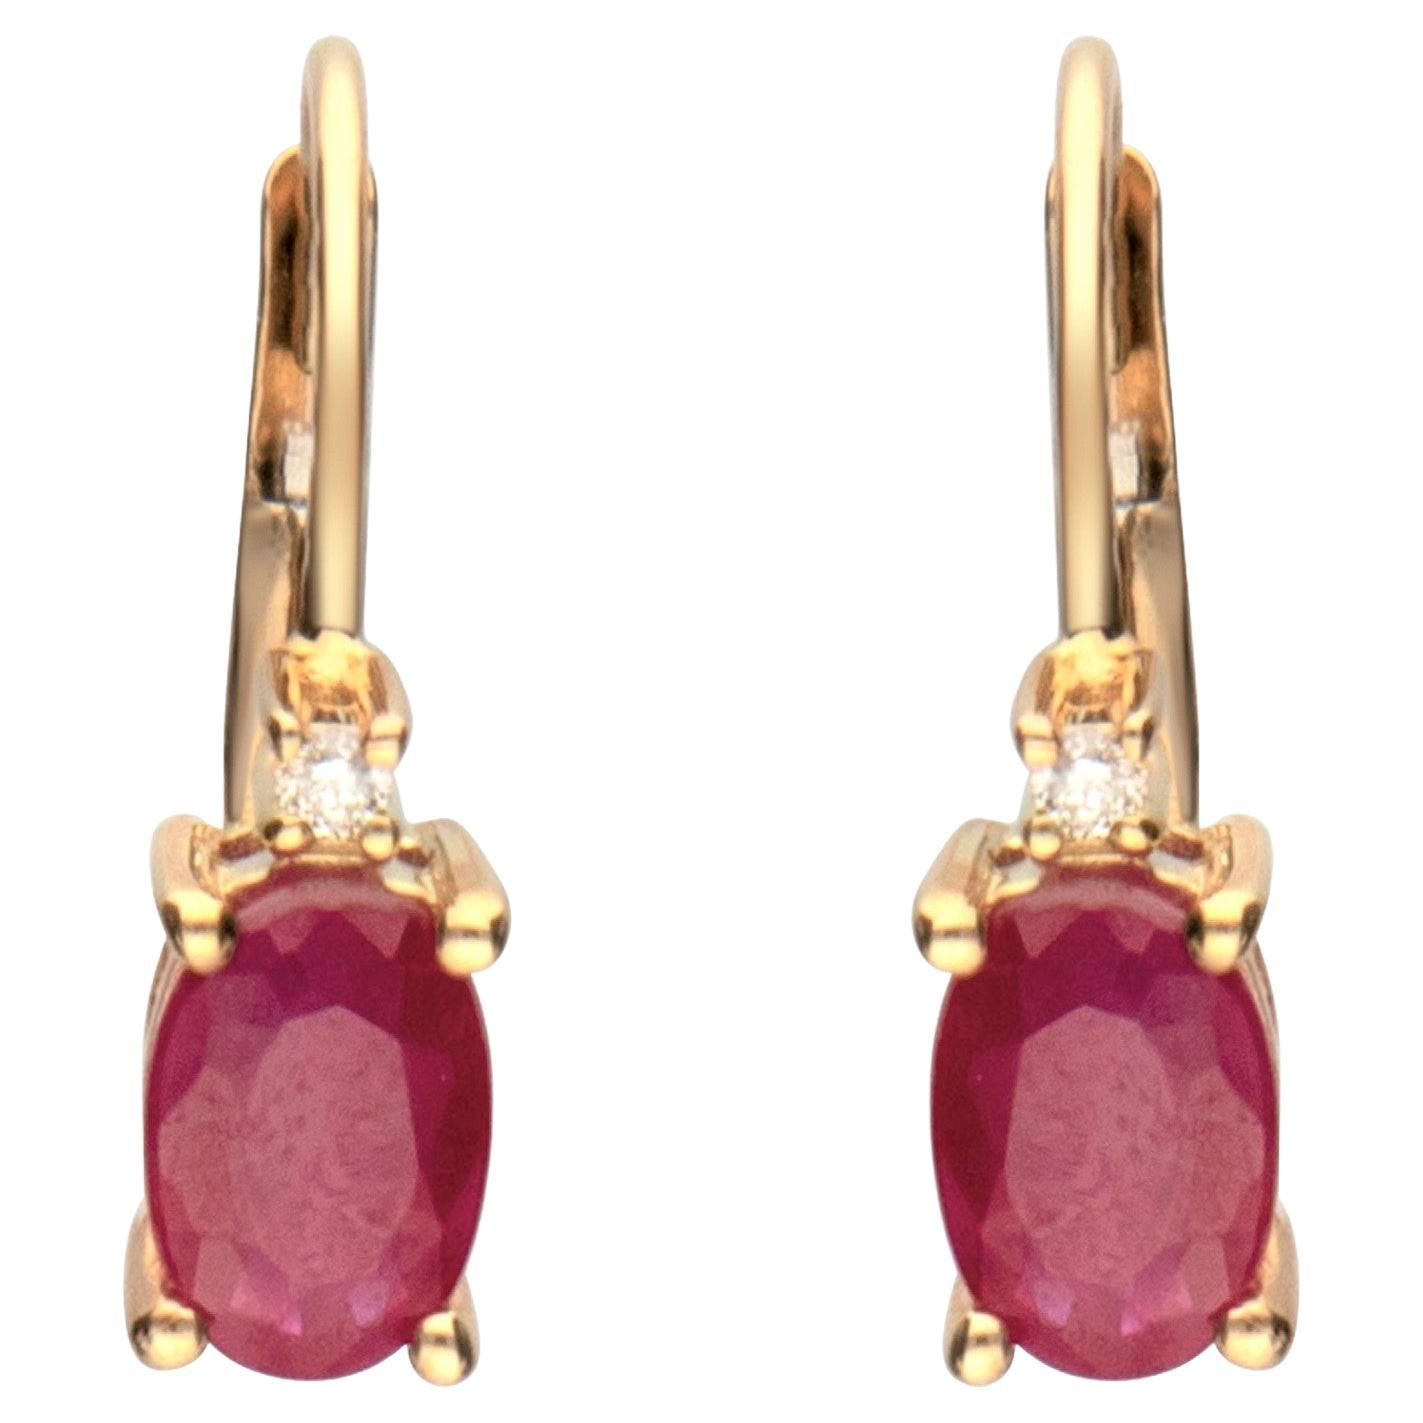 Gin and Grace 10k Rose Gold Oval-cut Pink Tourmaline Earrings